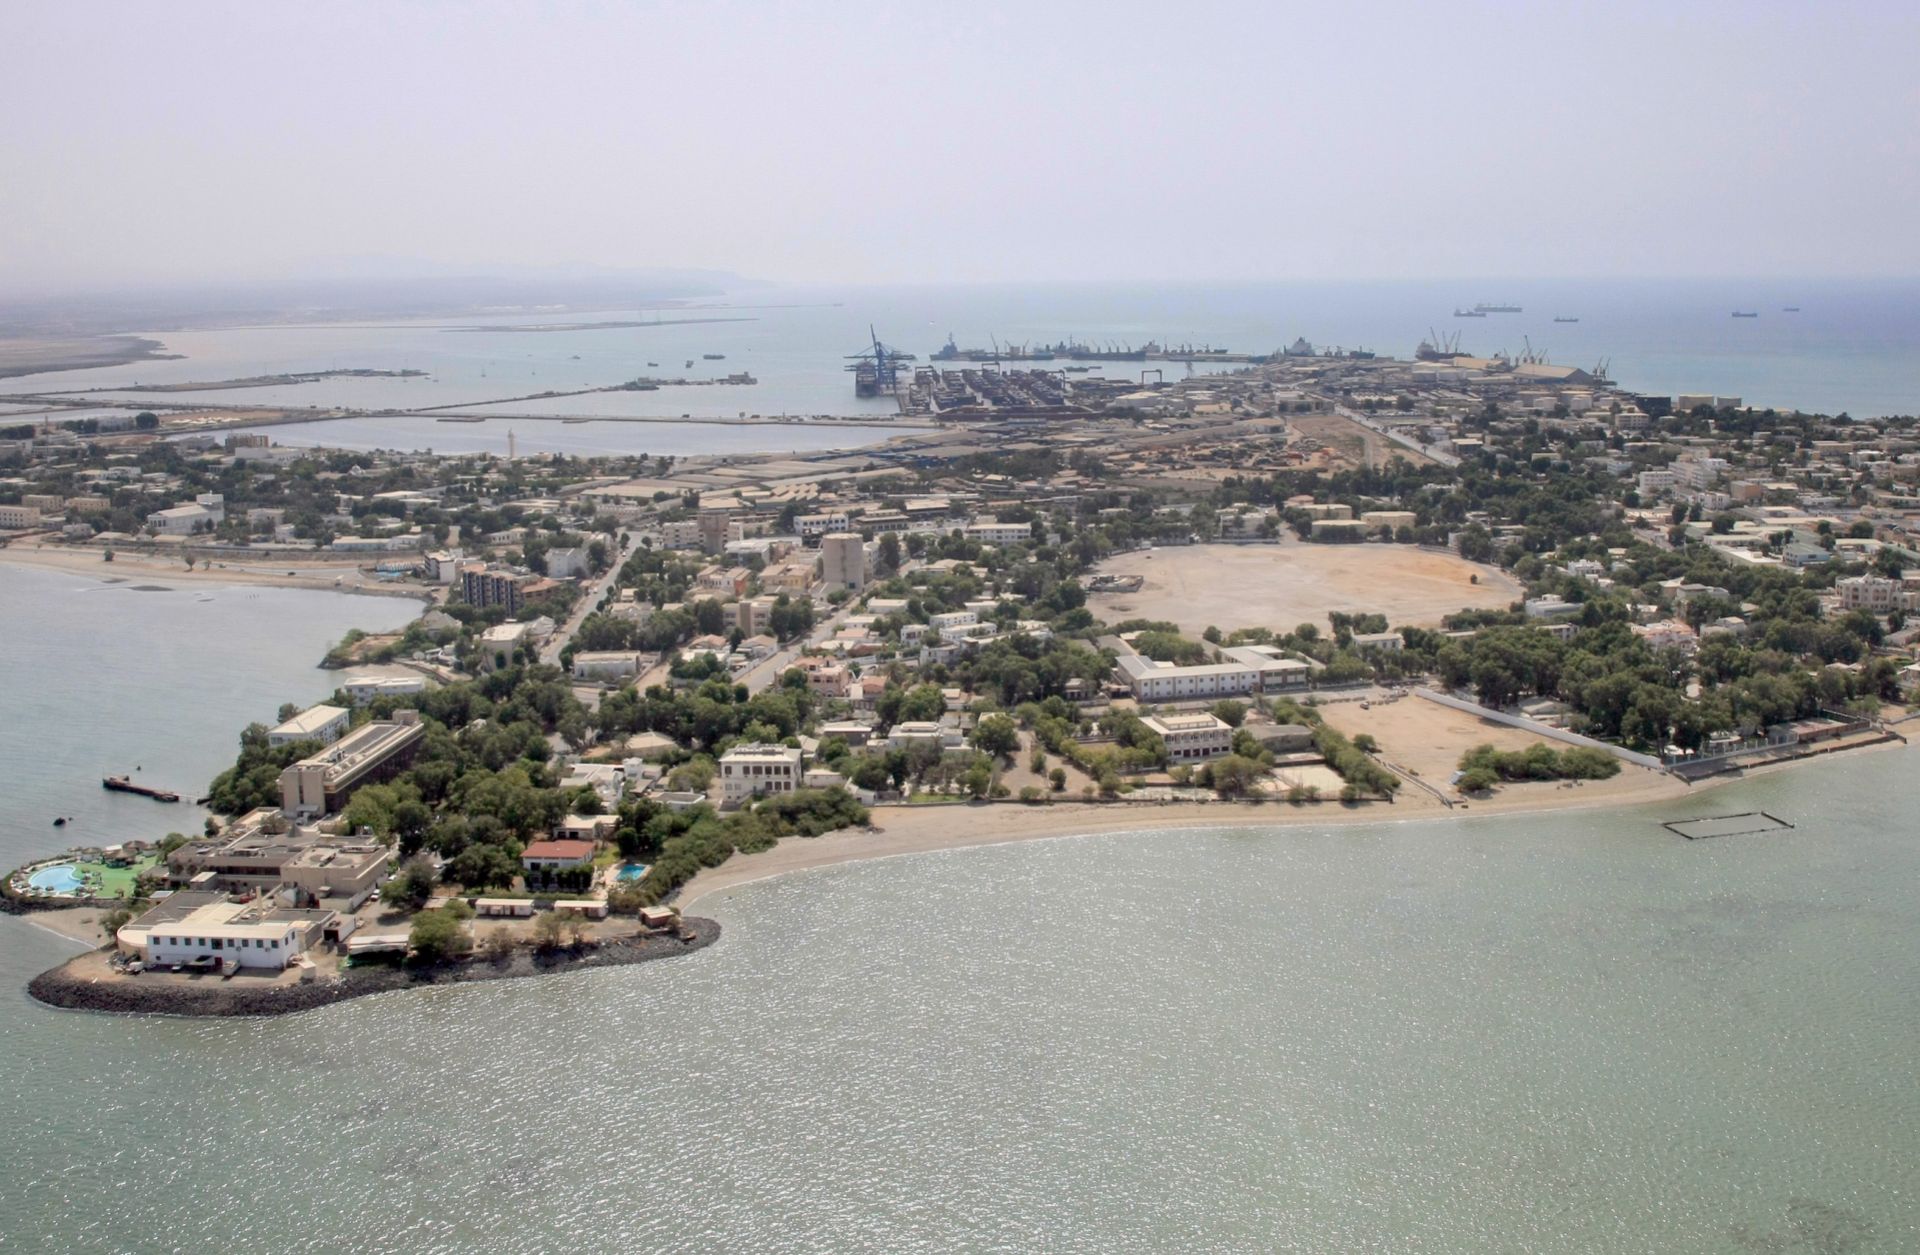 For Djibouti, It's All About Location